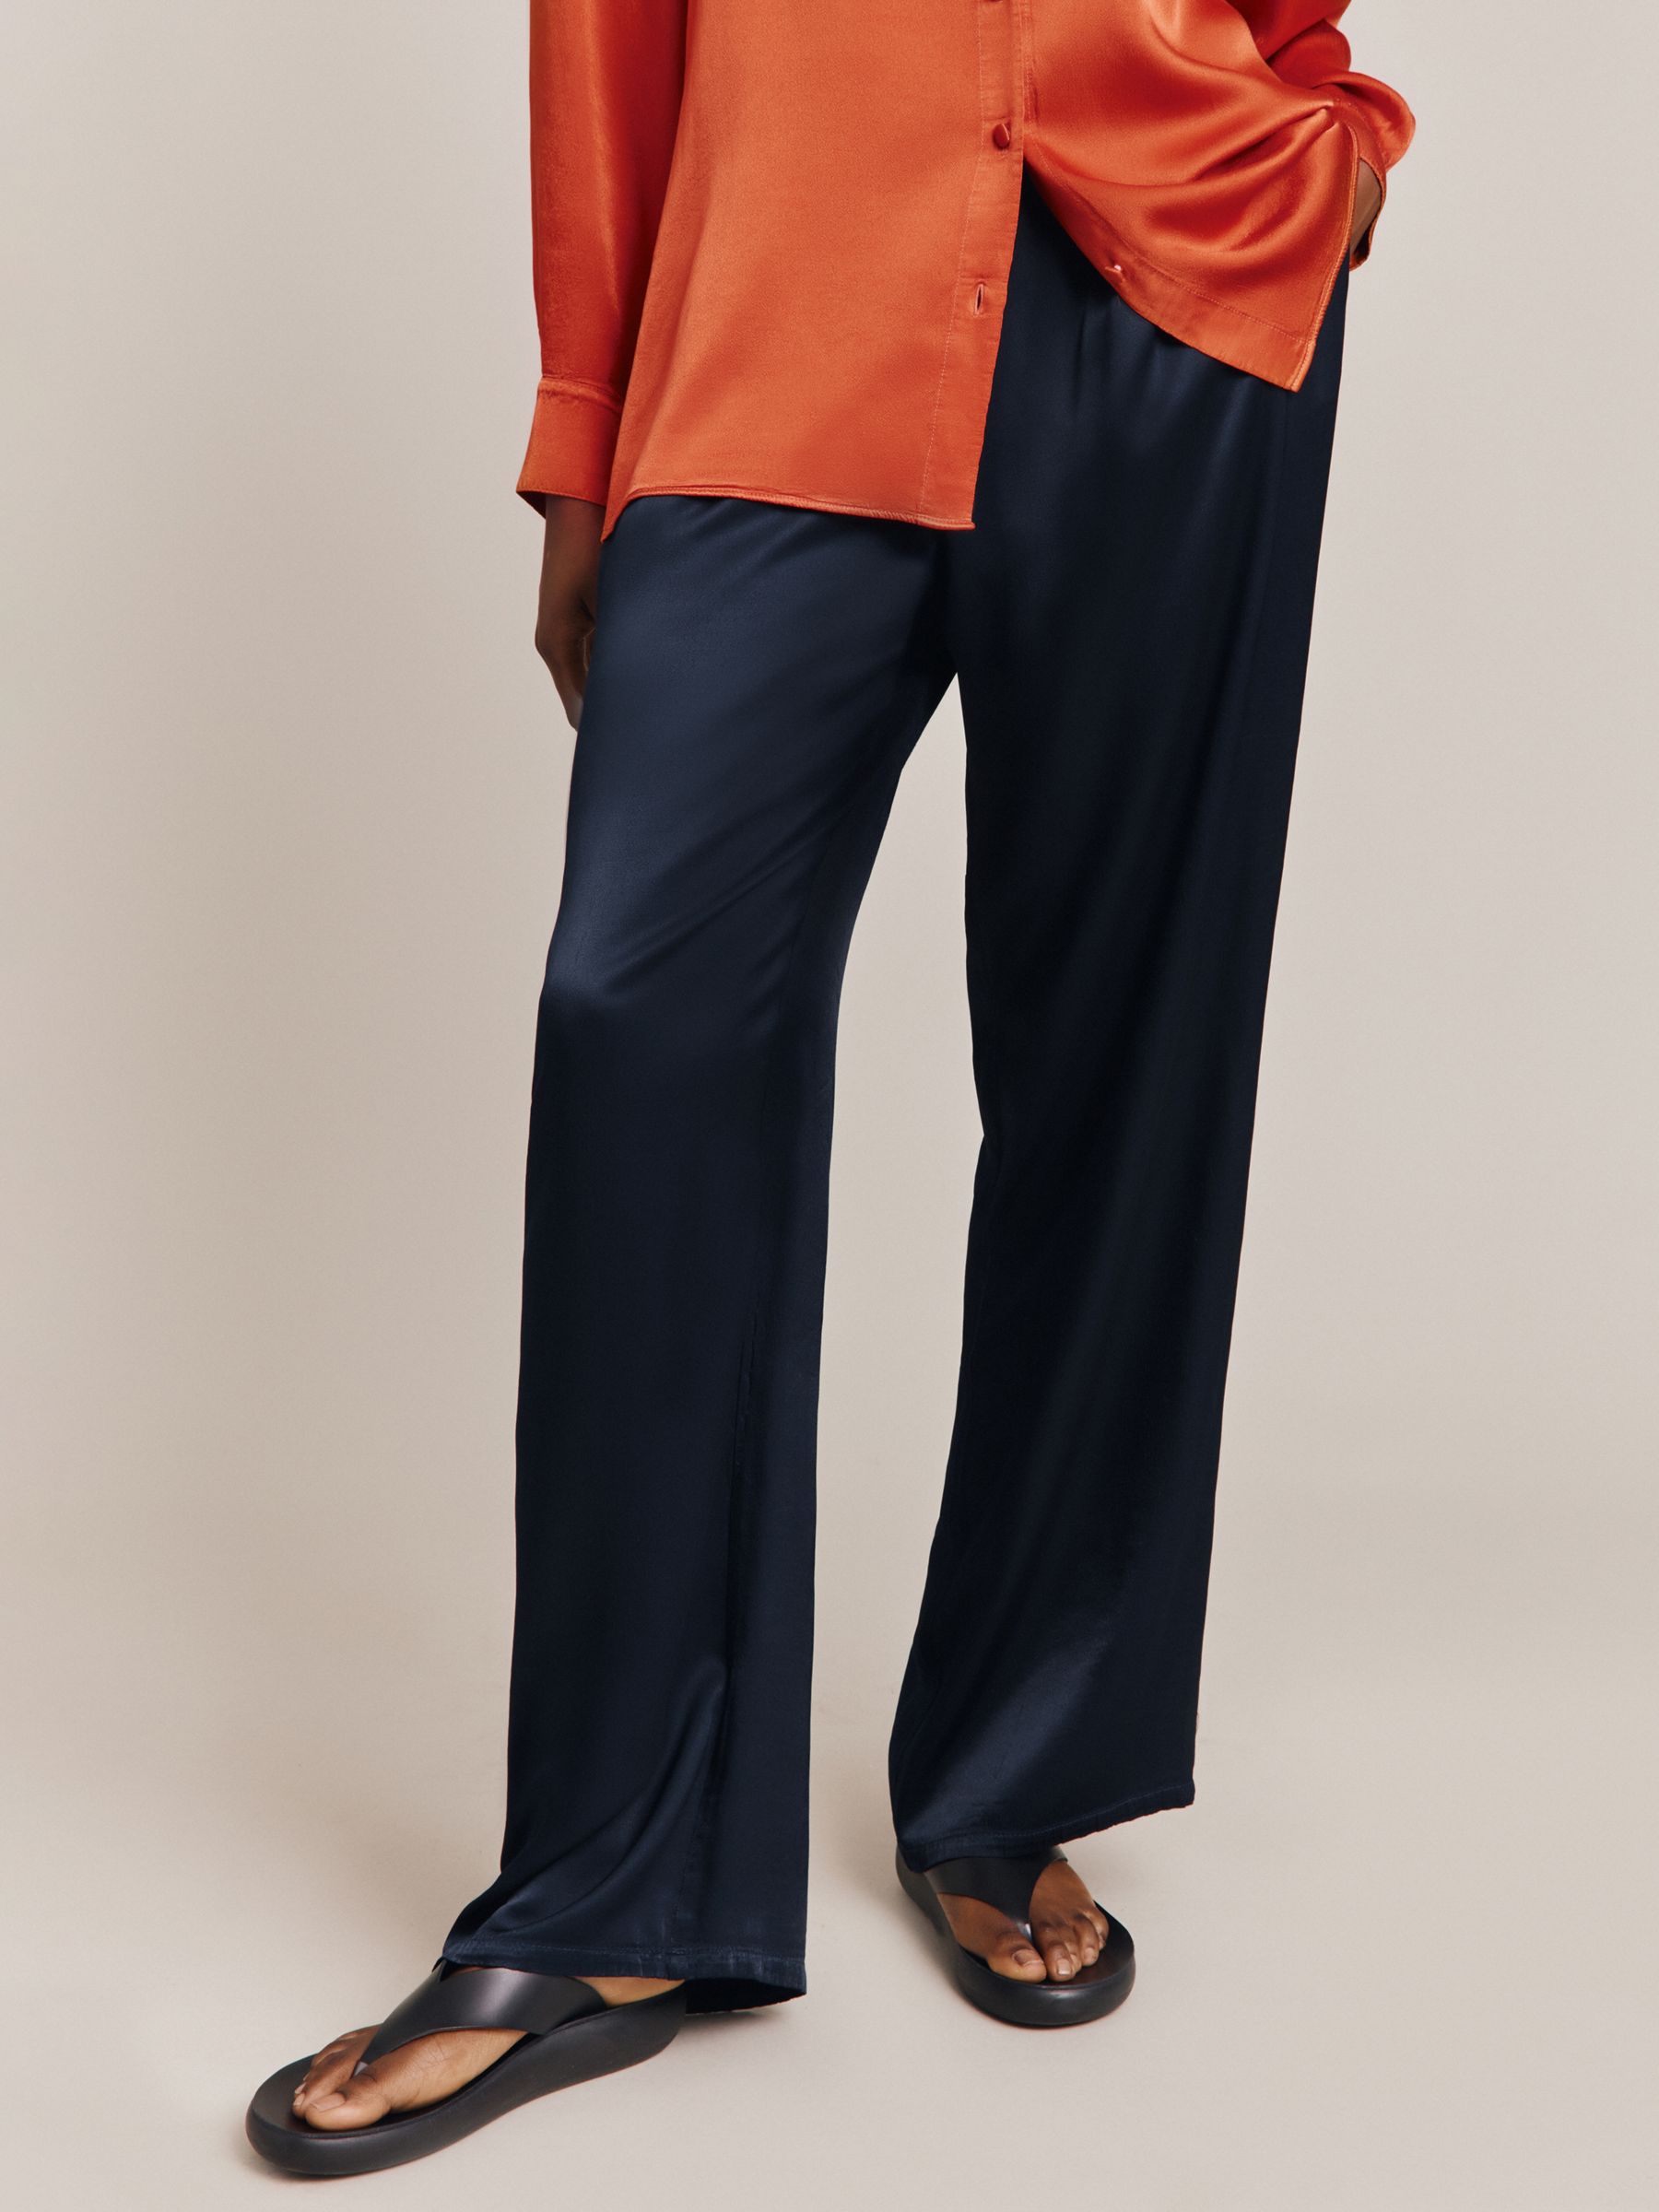 Ghost Imogen Satin Trousers, Navy at John Lewis & Partners